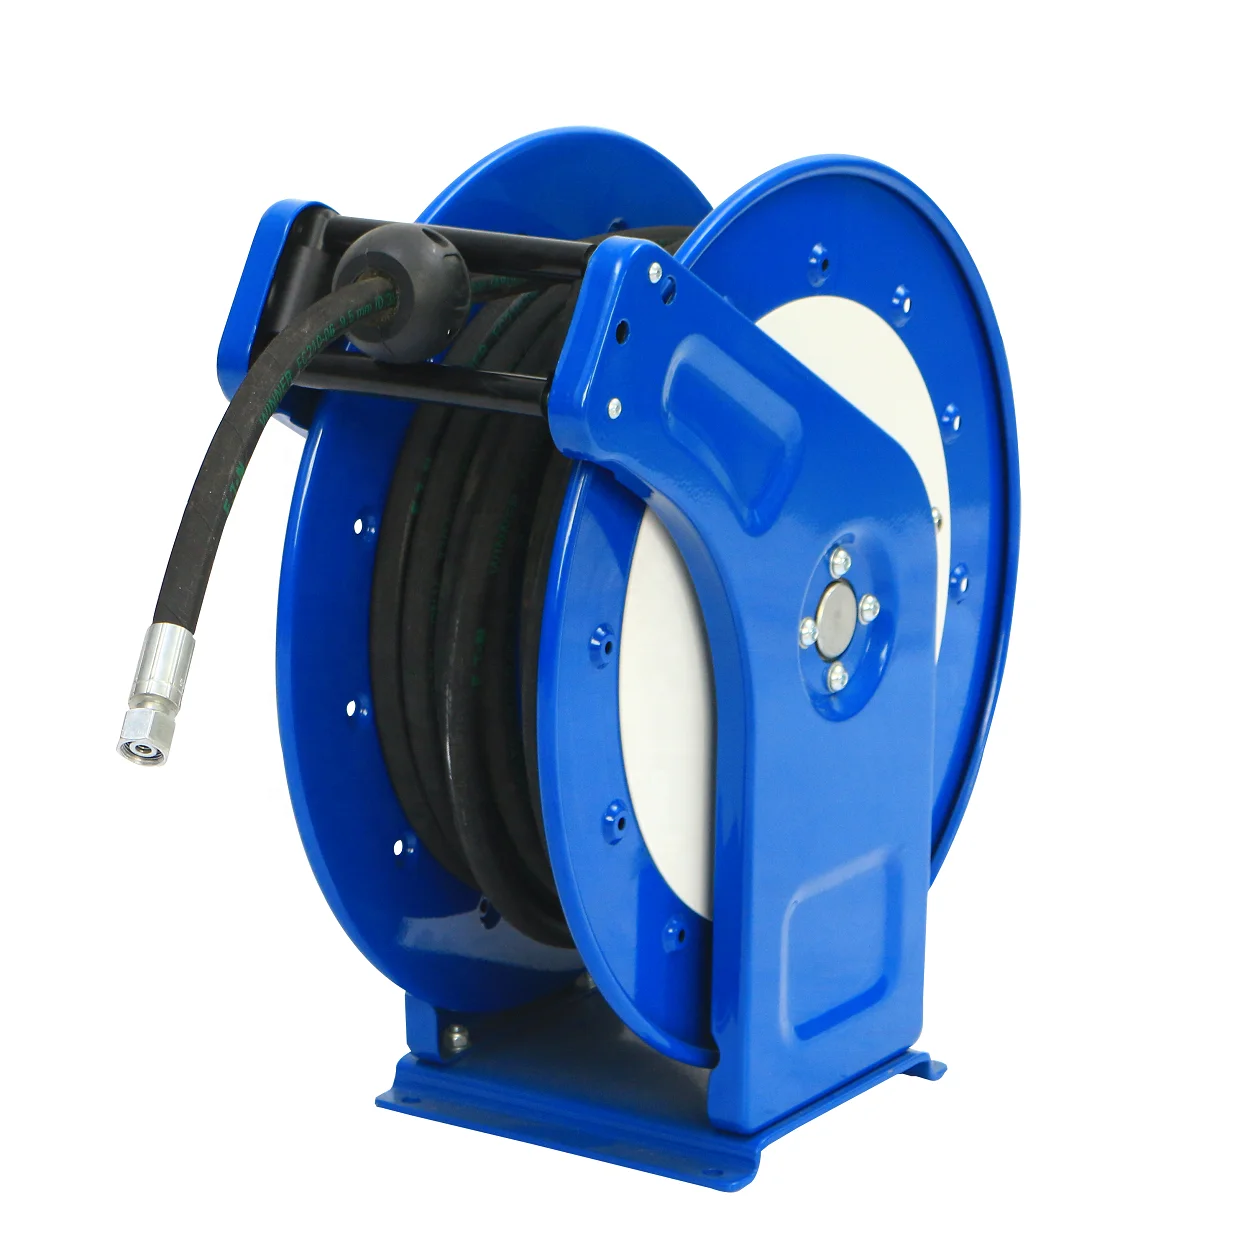 Spring Driven Self-retracting Industrial High Pressure Cleaning